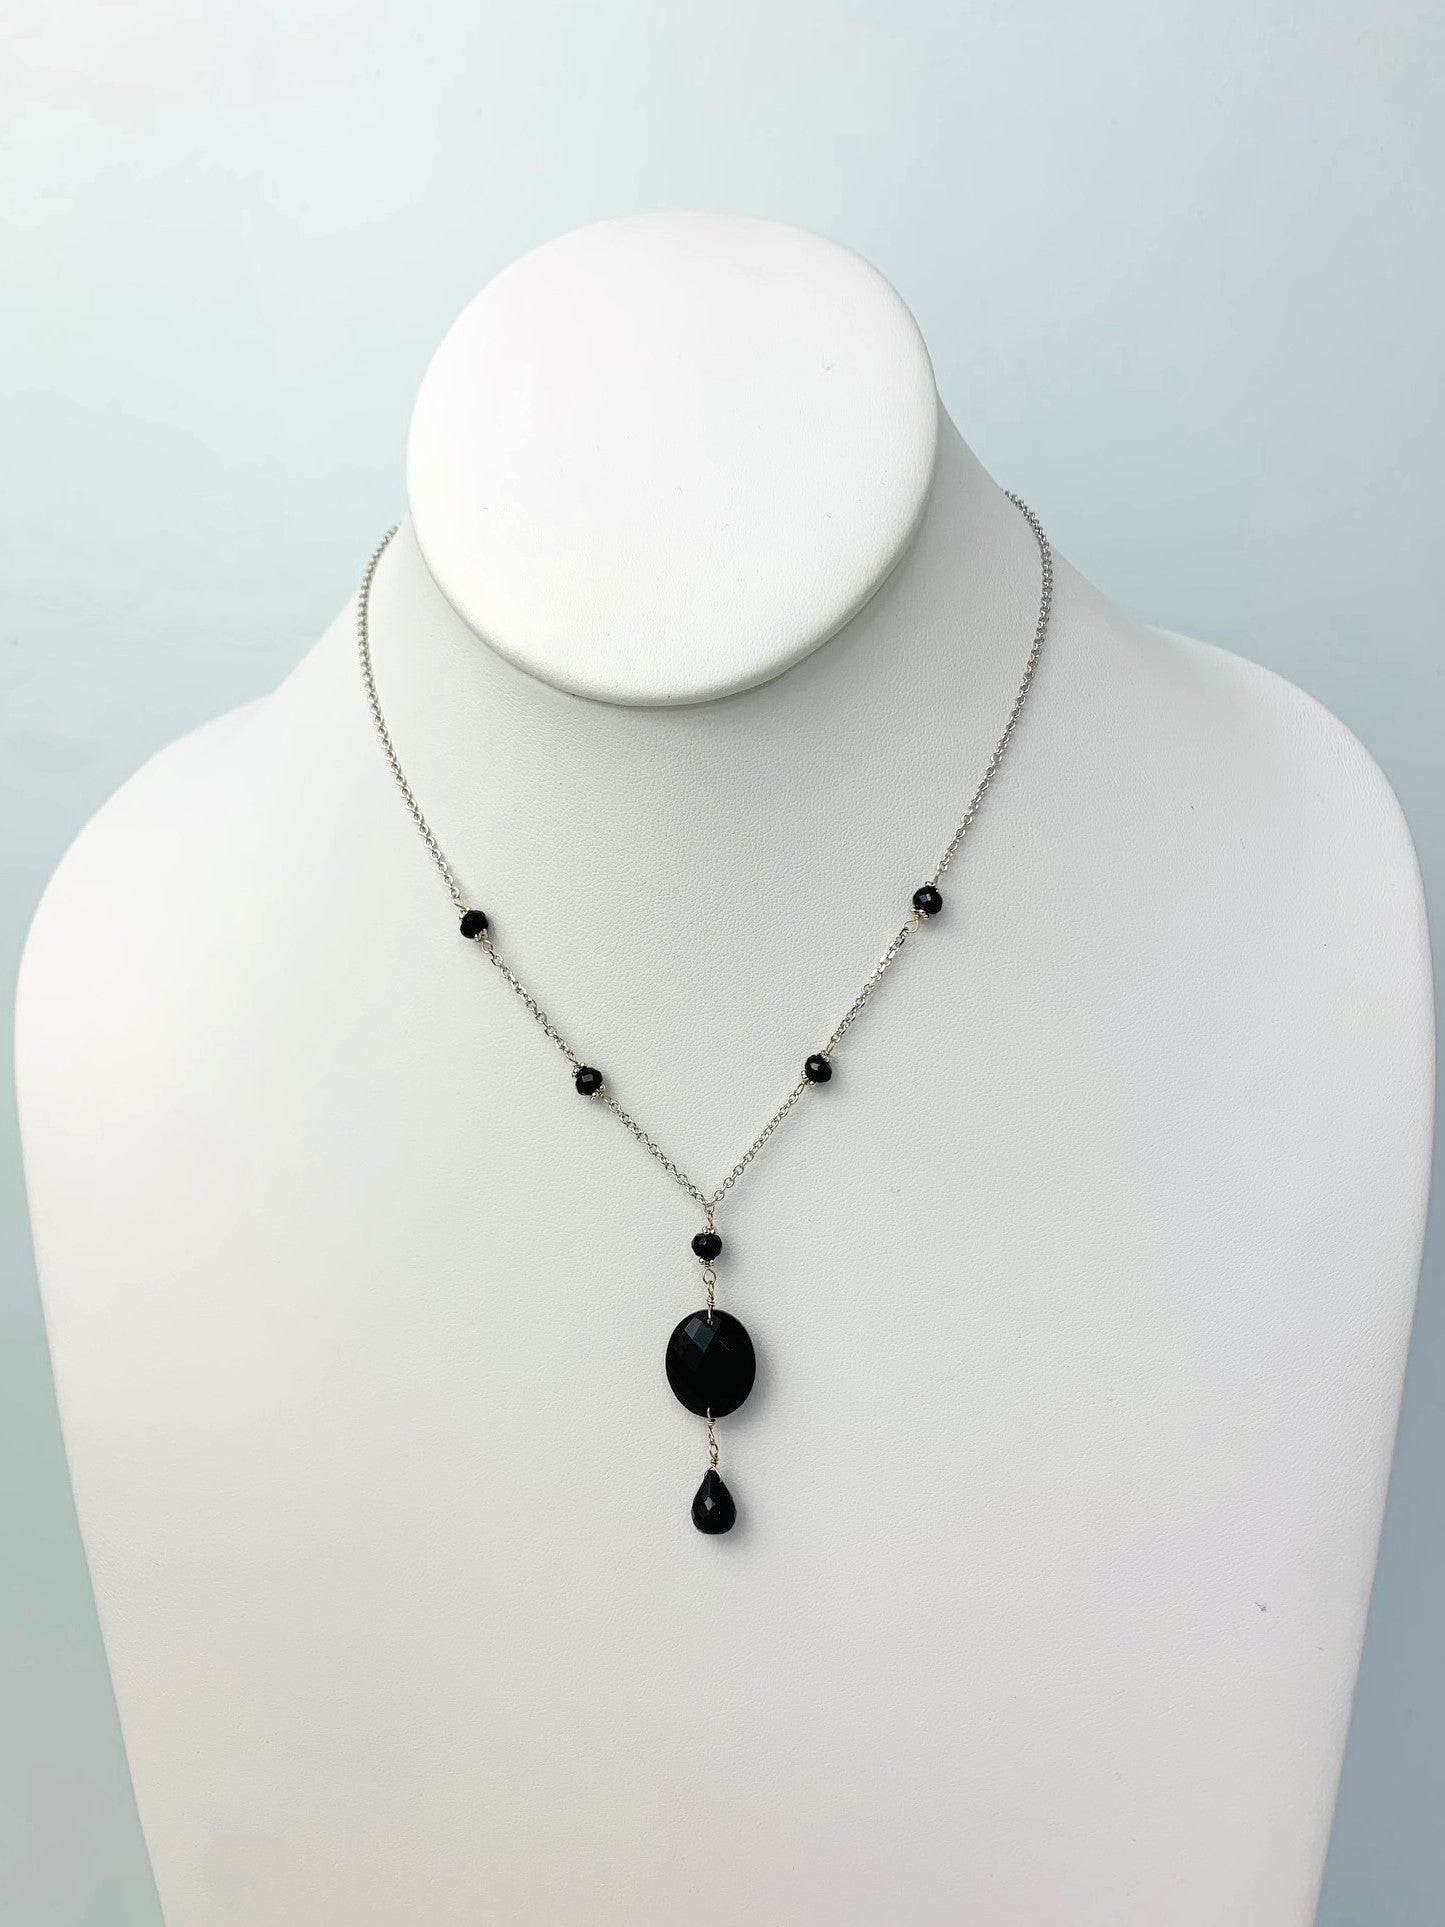 15" Onyx Station Necklace With Oval Checkerboard And Briolette Lariat Drop in 14KW - NCK-355-TNCDRPGM14W-OX-15